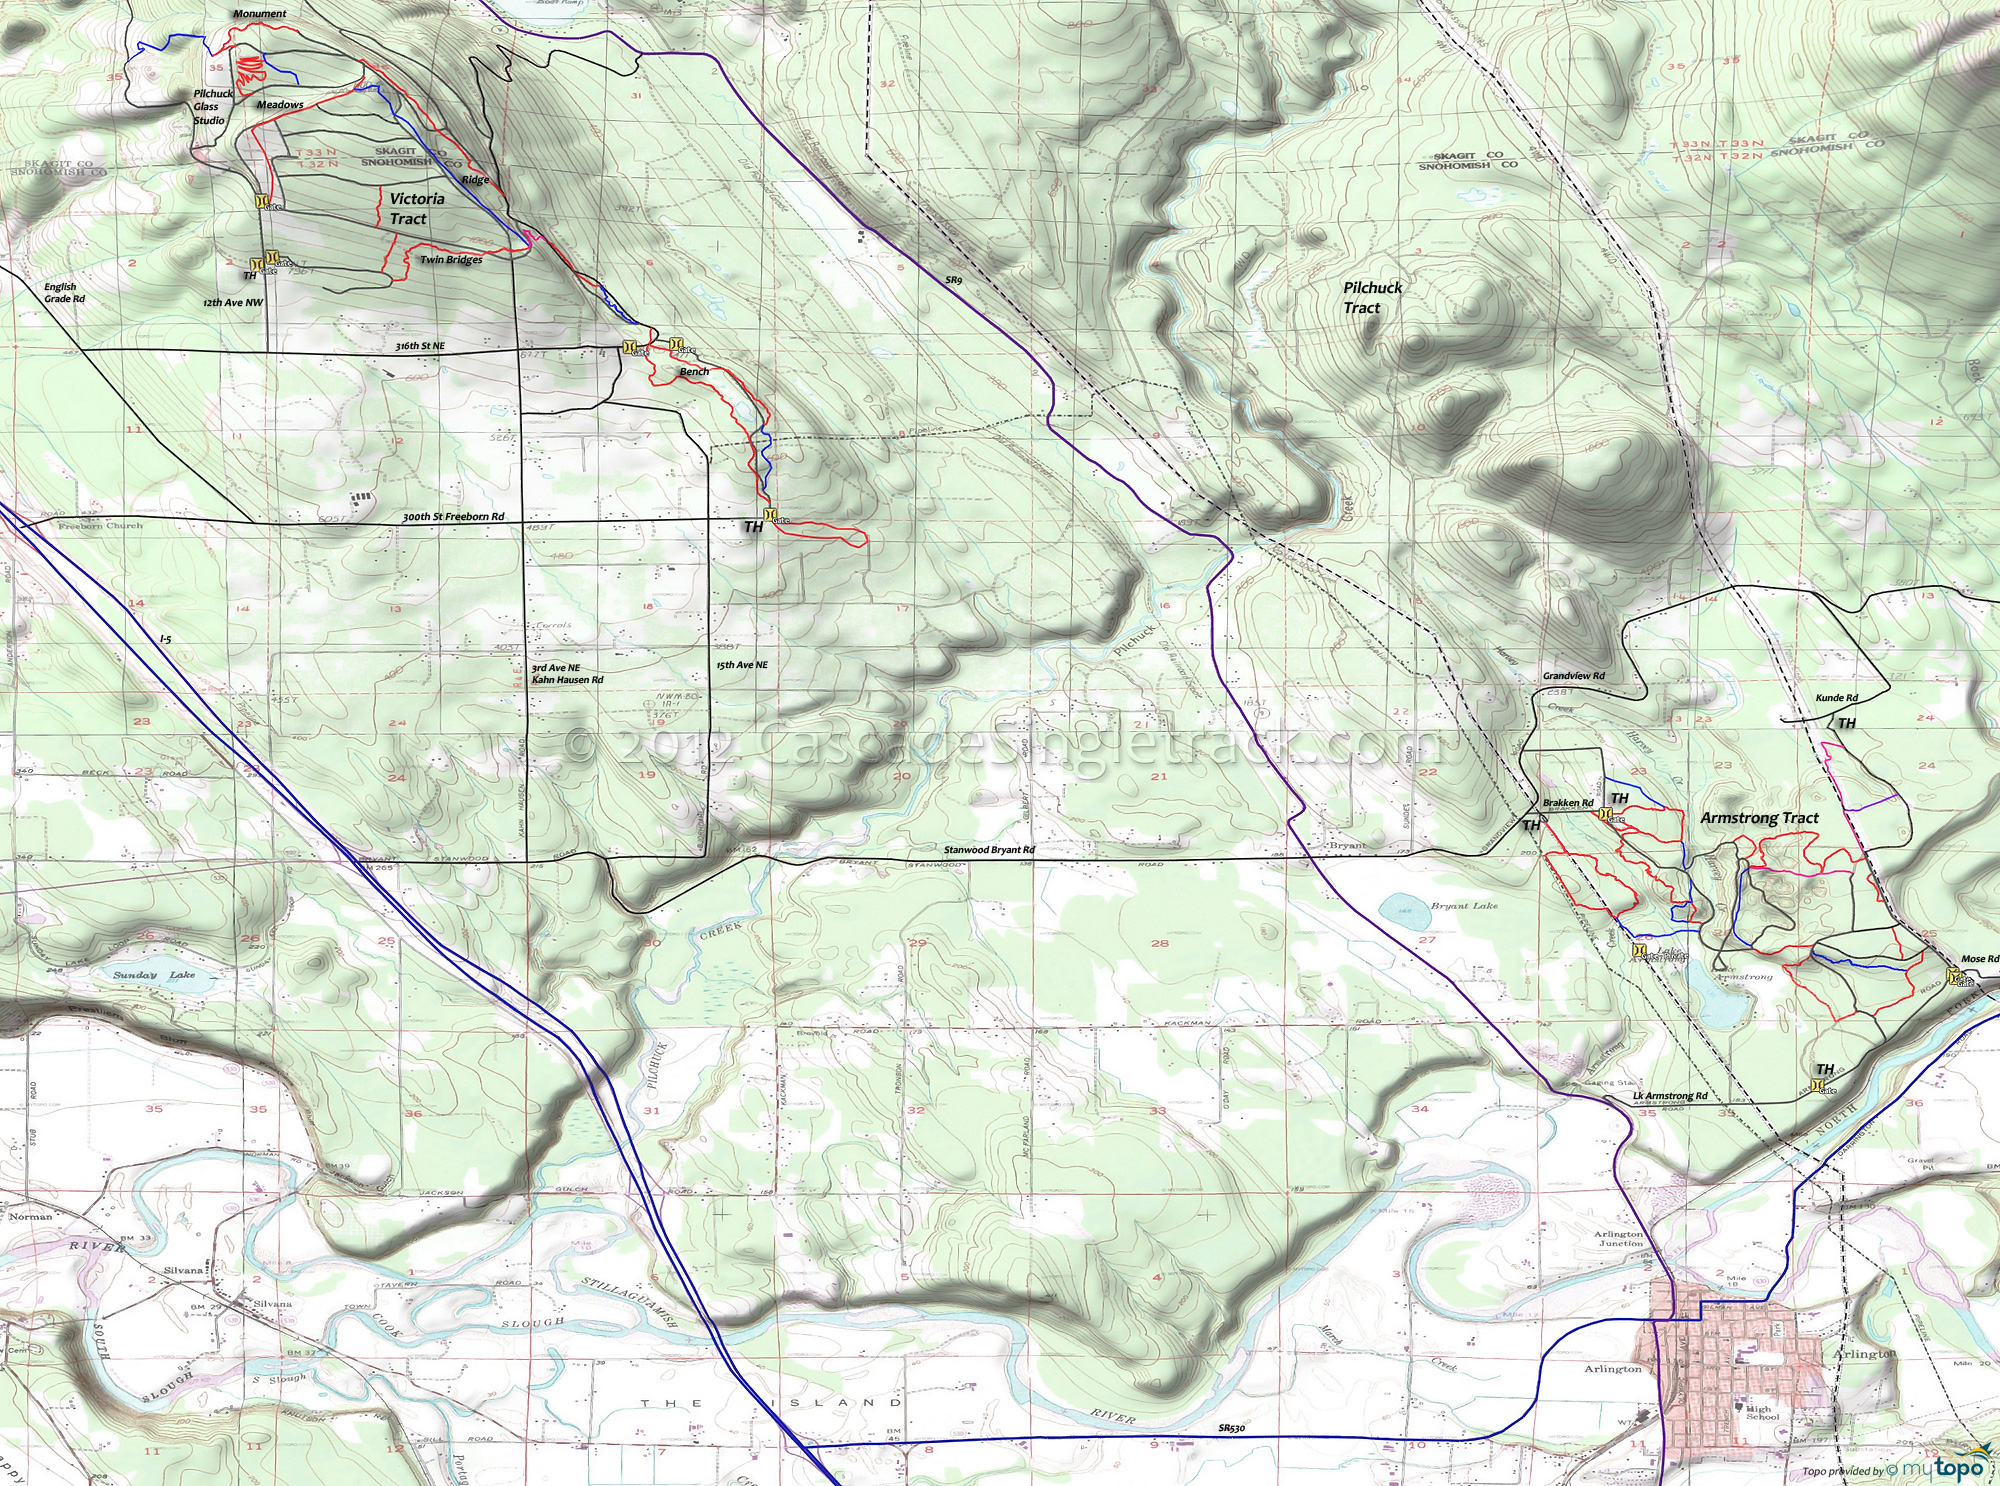 Pilchuck Tree Farm Victoria and Armstrong Tract Trails Area Topo Map